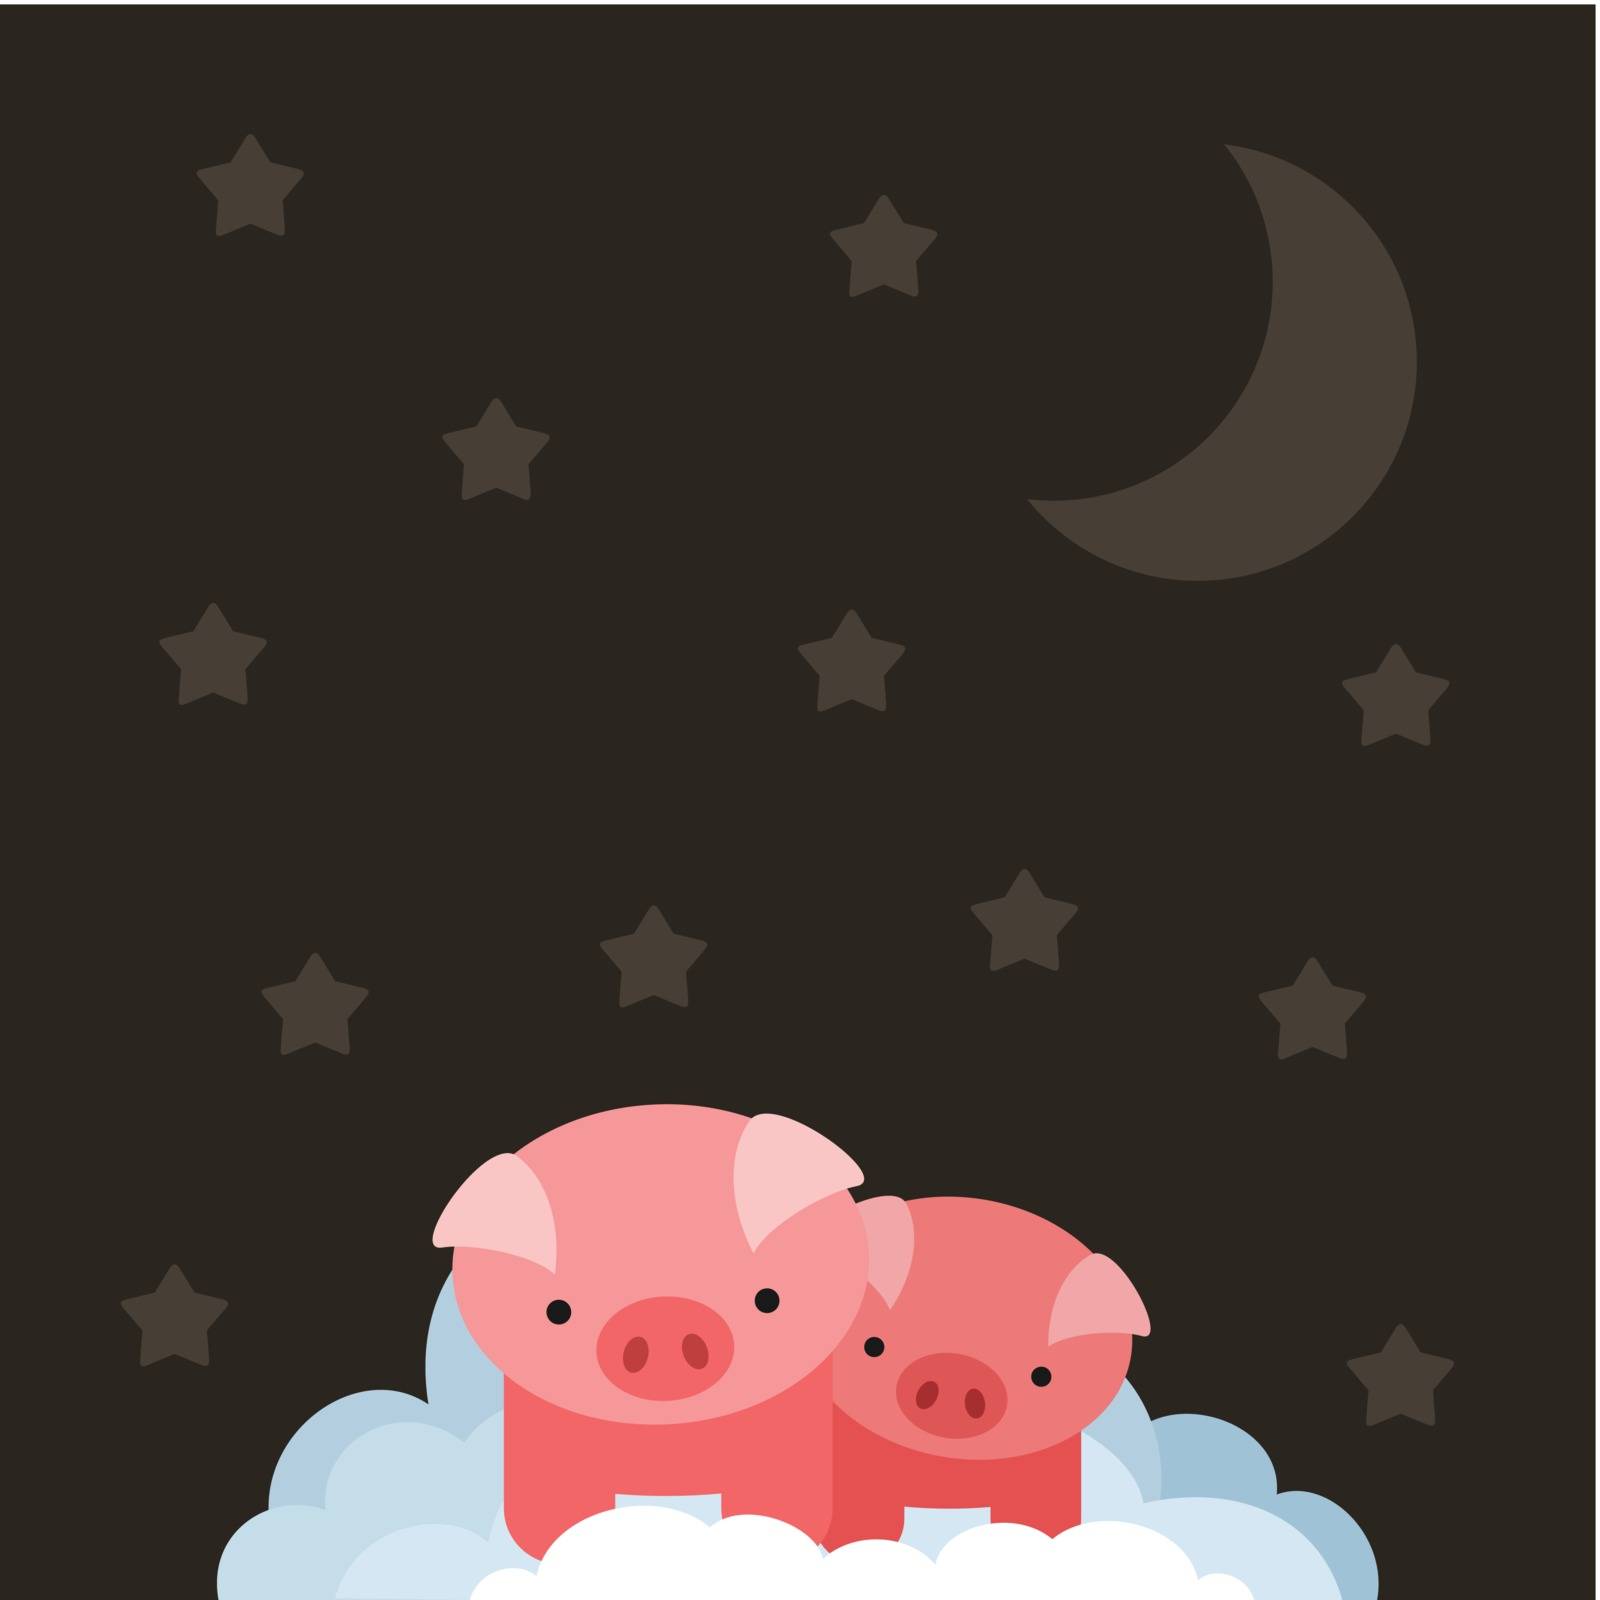 Two pigs in the sky. A vector illustration